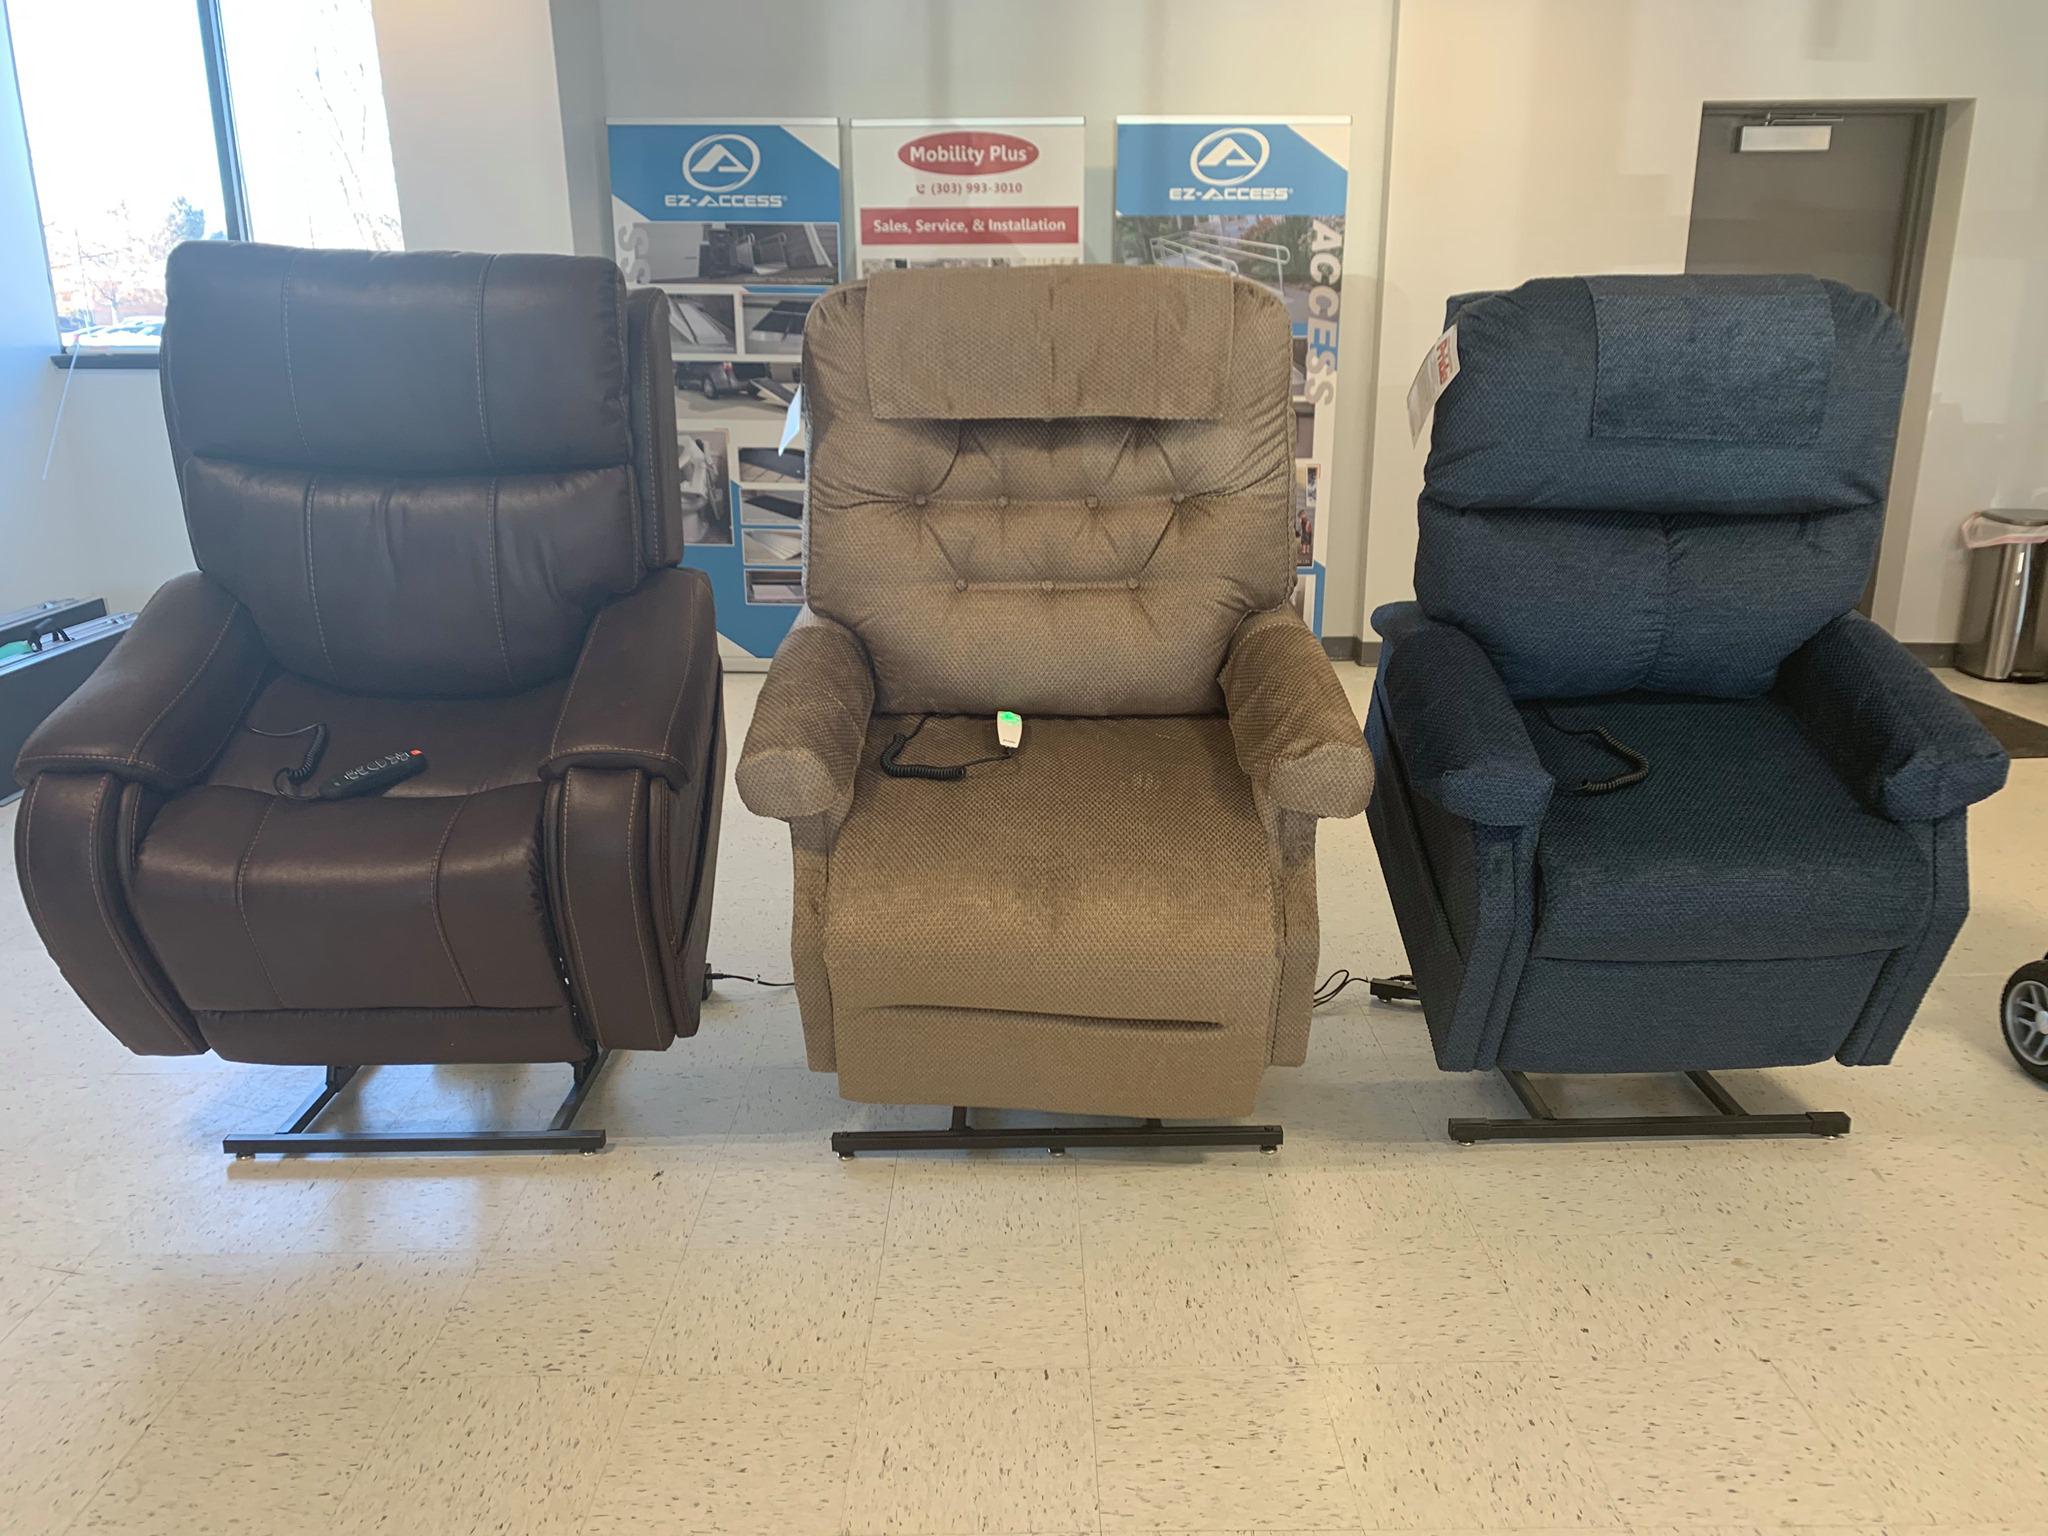 Recliner Lift Chairs